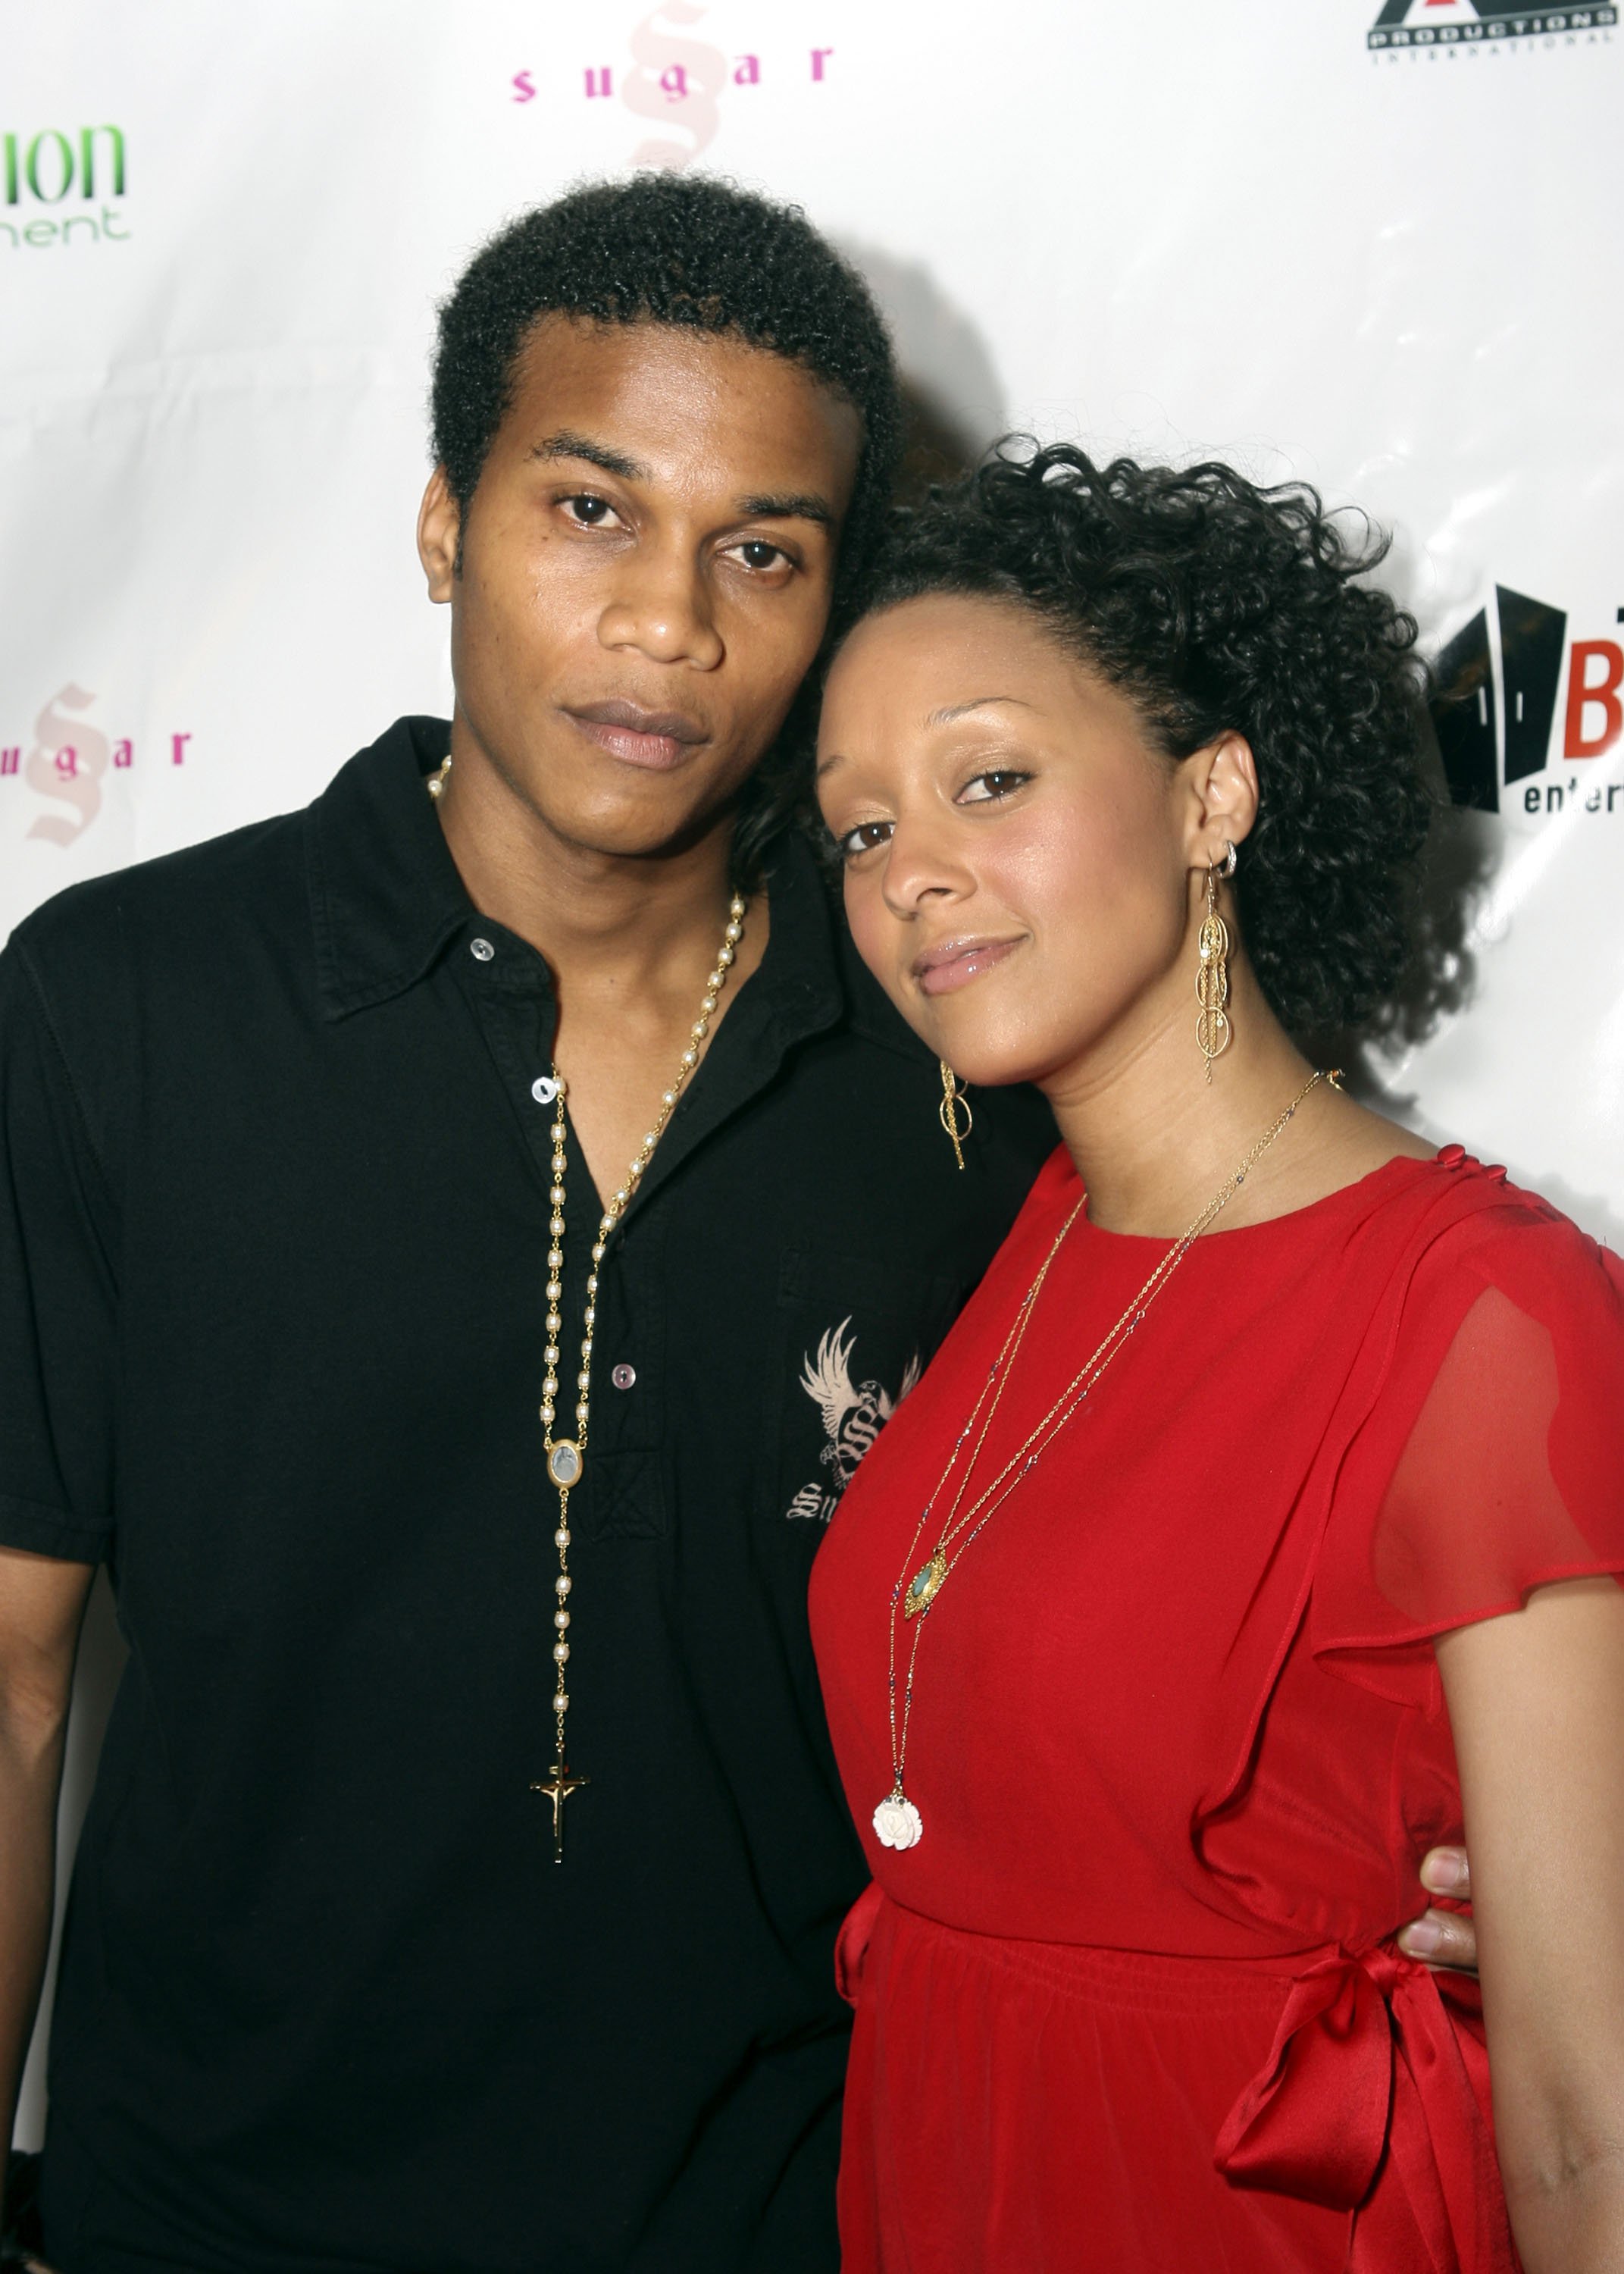 Cory Hardrict and Tia Mowry at the Styles and Substance Magazine Launch Party on June 7, 2007 | Source: Getty Images